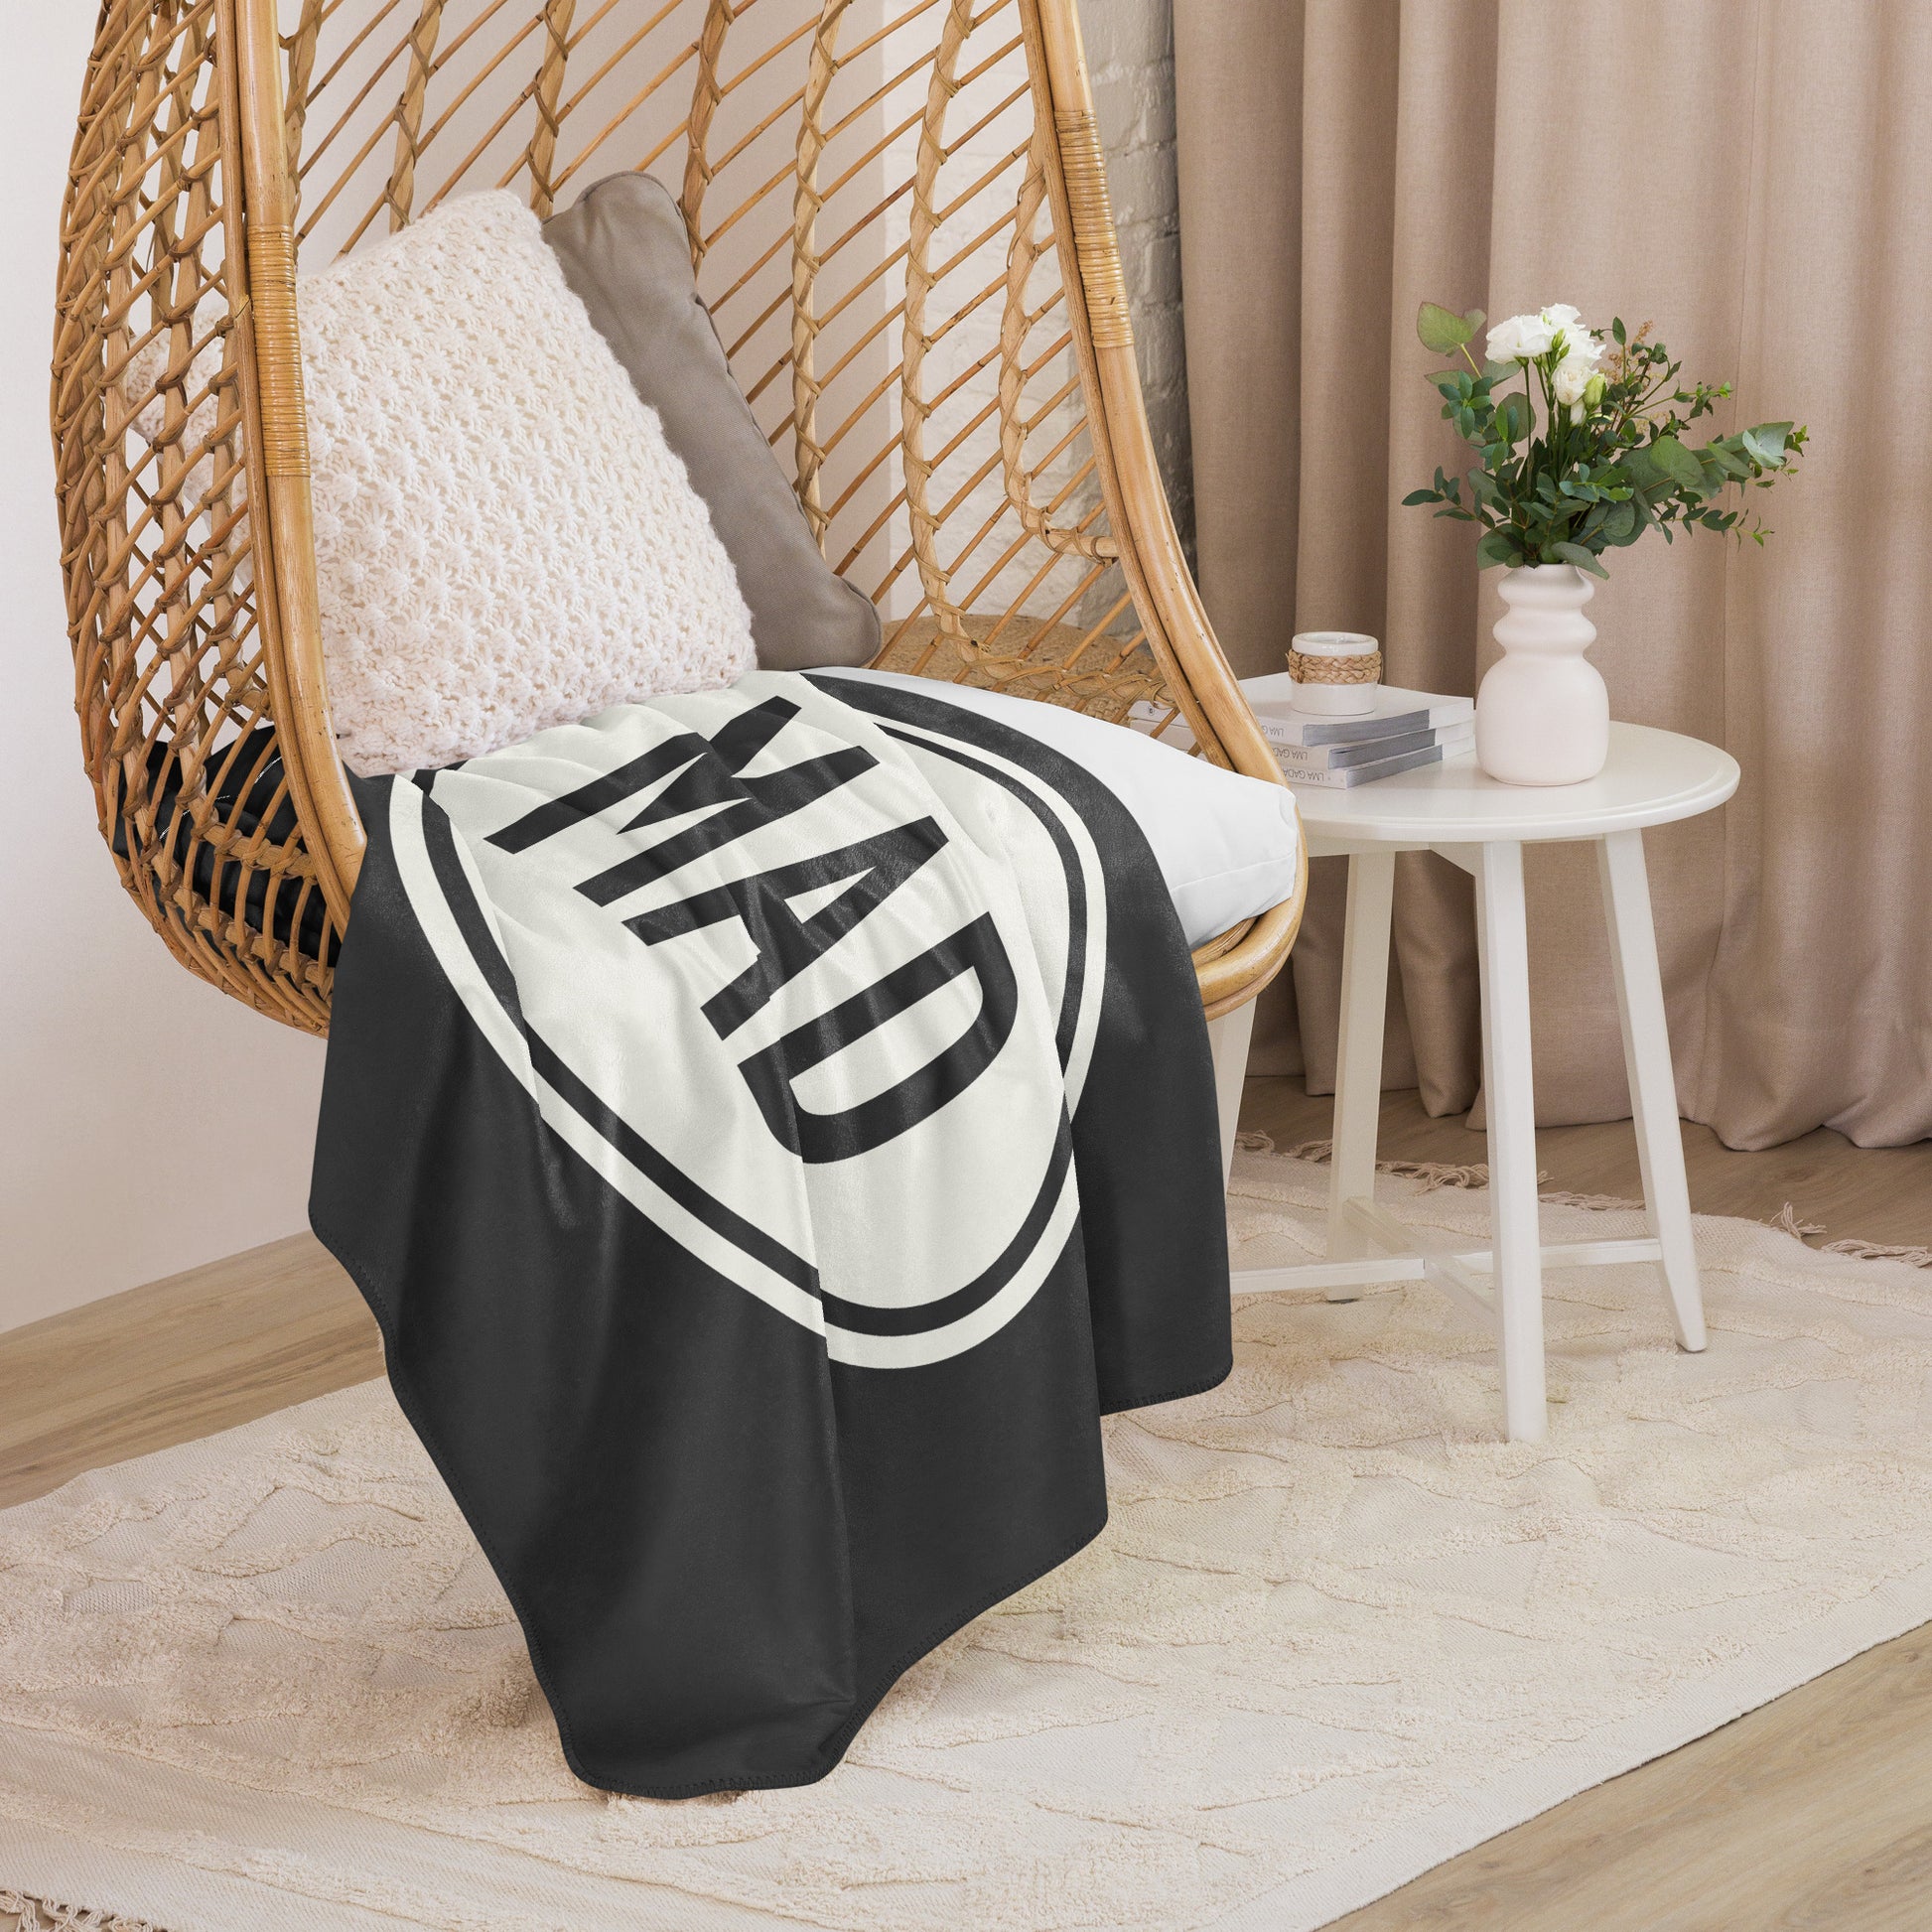 Unique Travel Gift Sherpa Blanket - White Oval • MAD Madrid • YHM Designs - Image 06